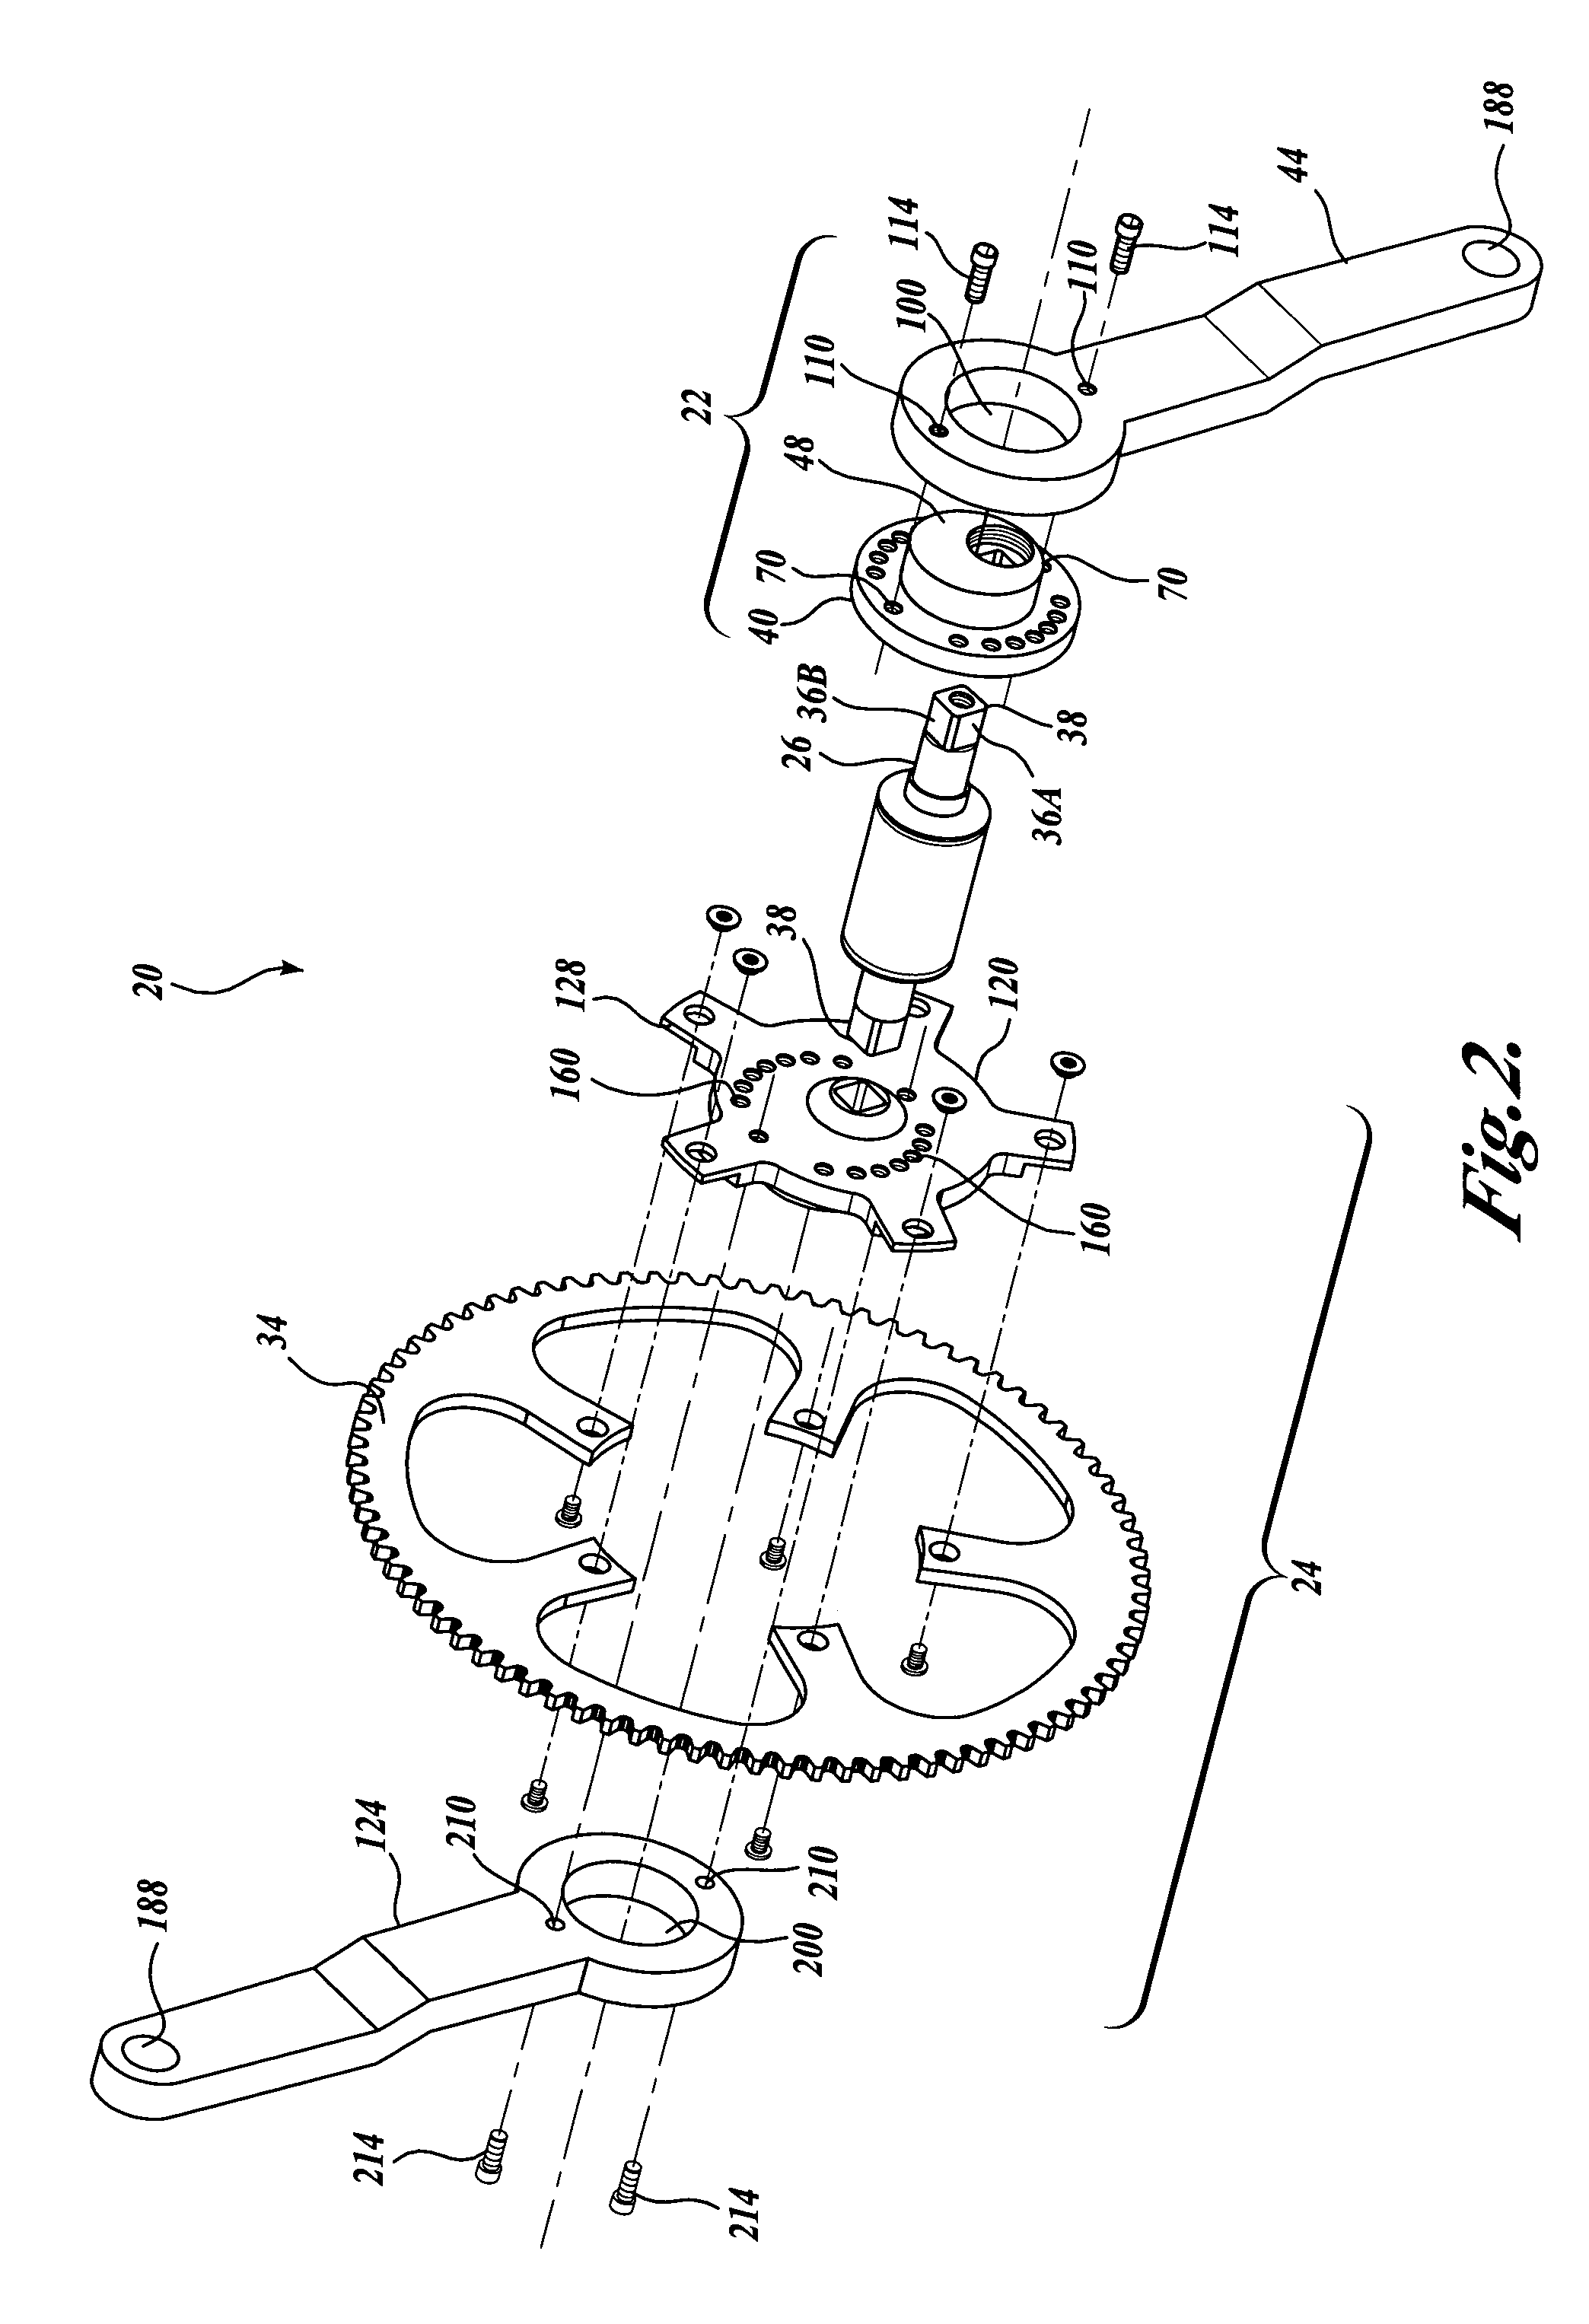 Adjustable crank for bicycles